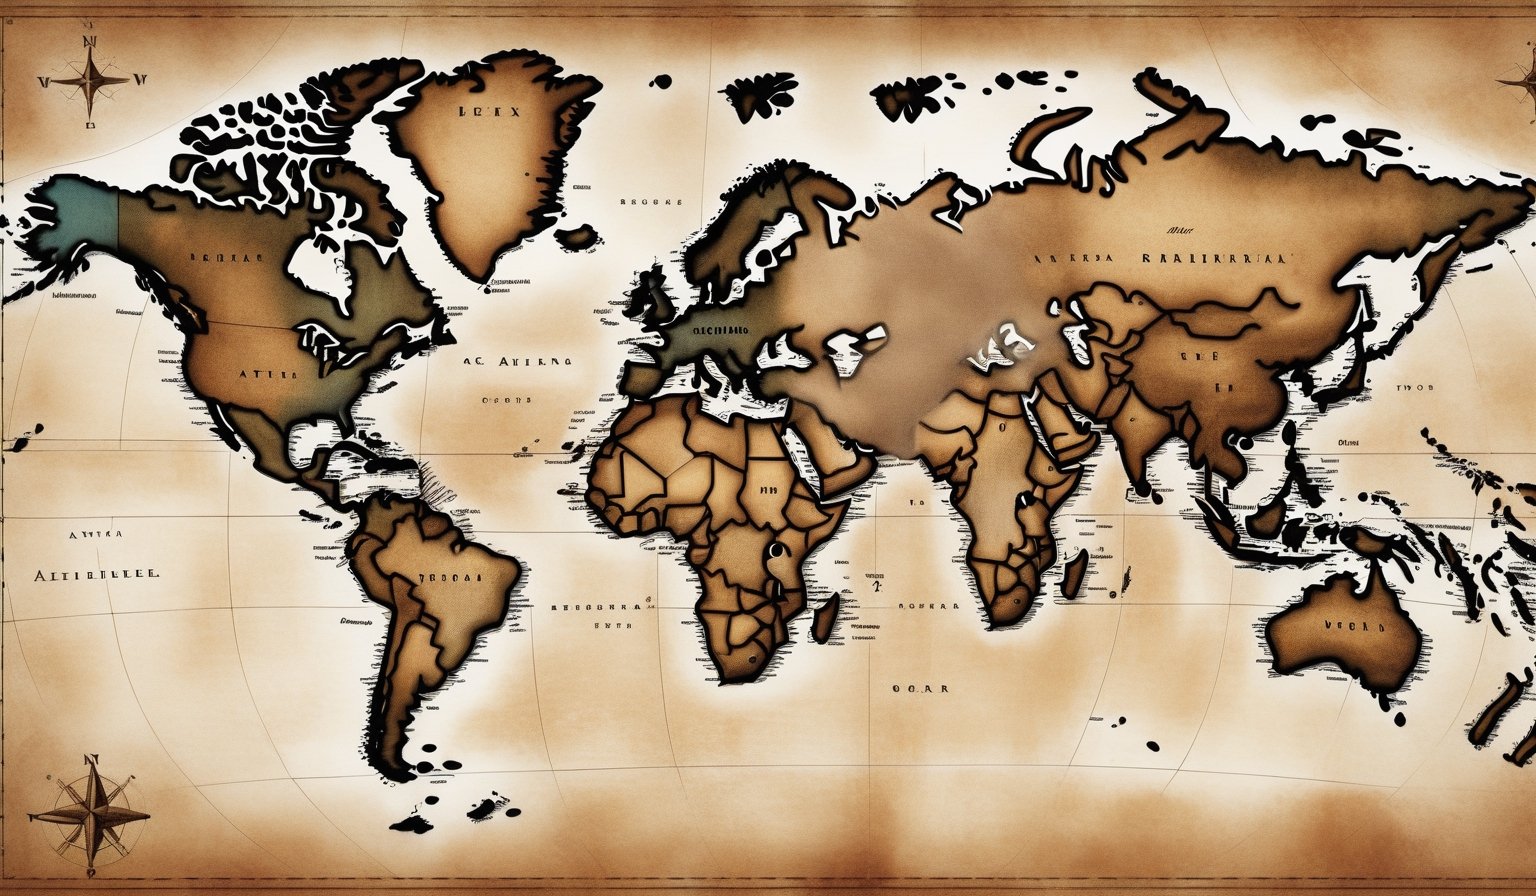 A vintage map of the world with a medium-sized X marked in the Atlantic, rendered in a classic, antique style.